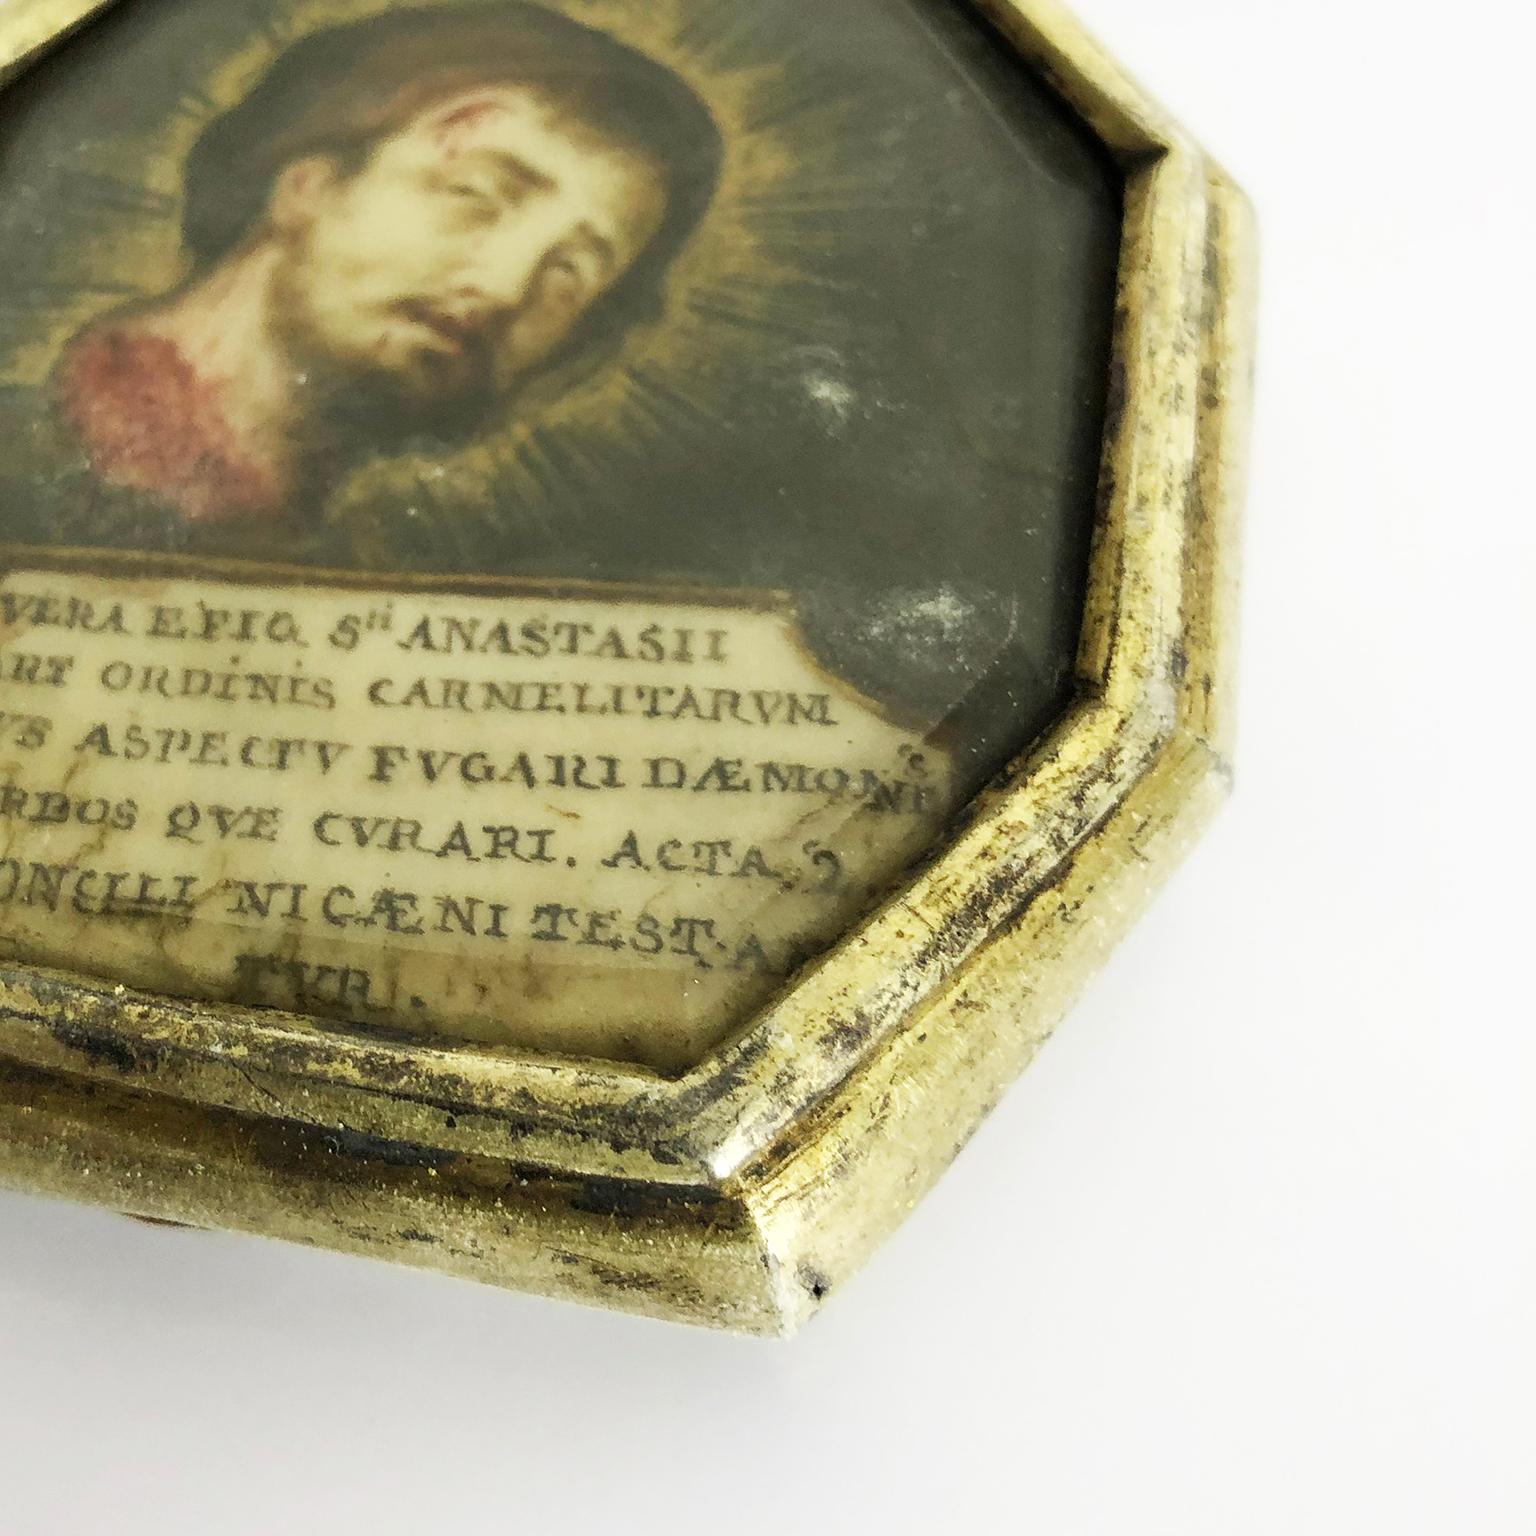 We offer this amazing Reliquary made in silver and gold plated, Inside we can see the face of Christ, some details of the Christ painting were painted in copper paint and some Latin words.

This type of jewelry always had a great value both for